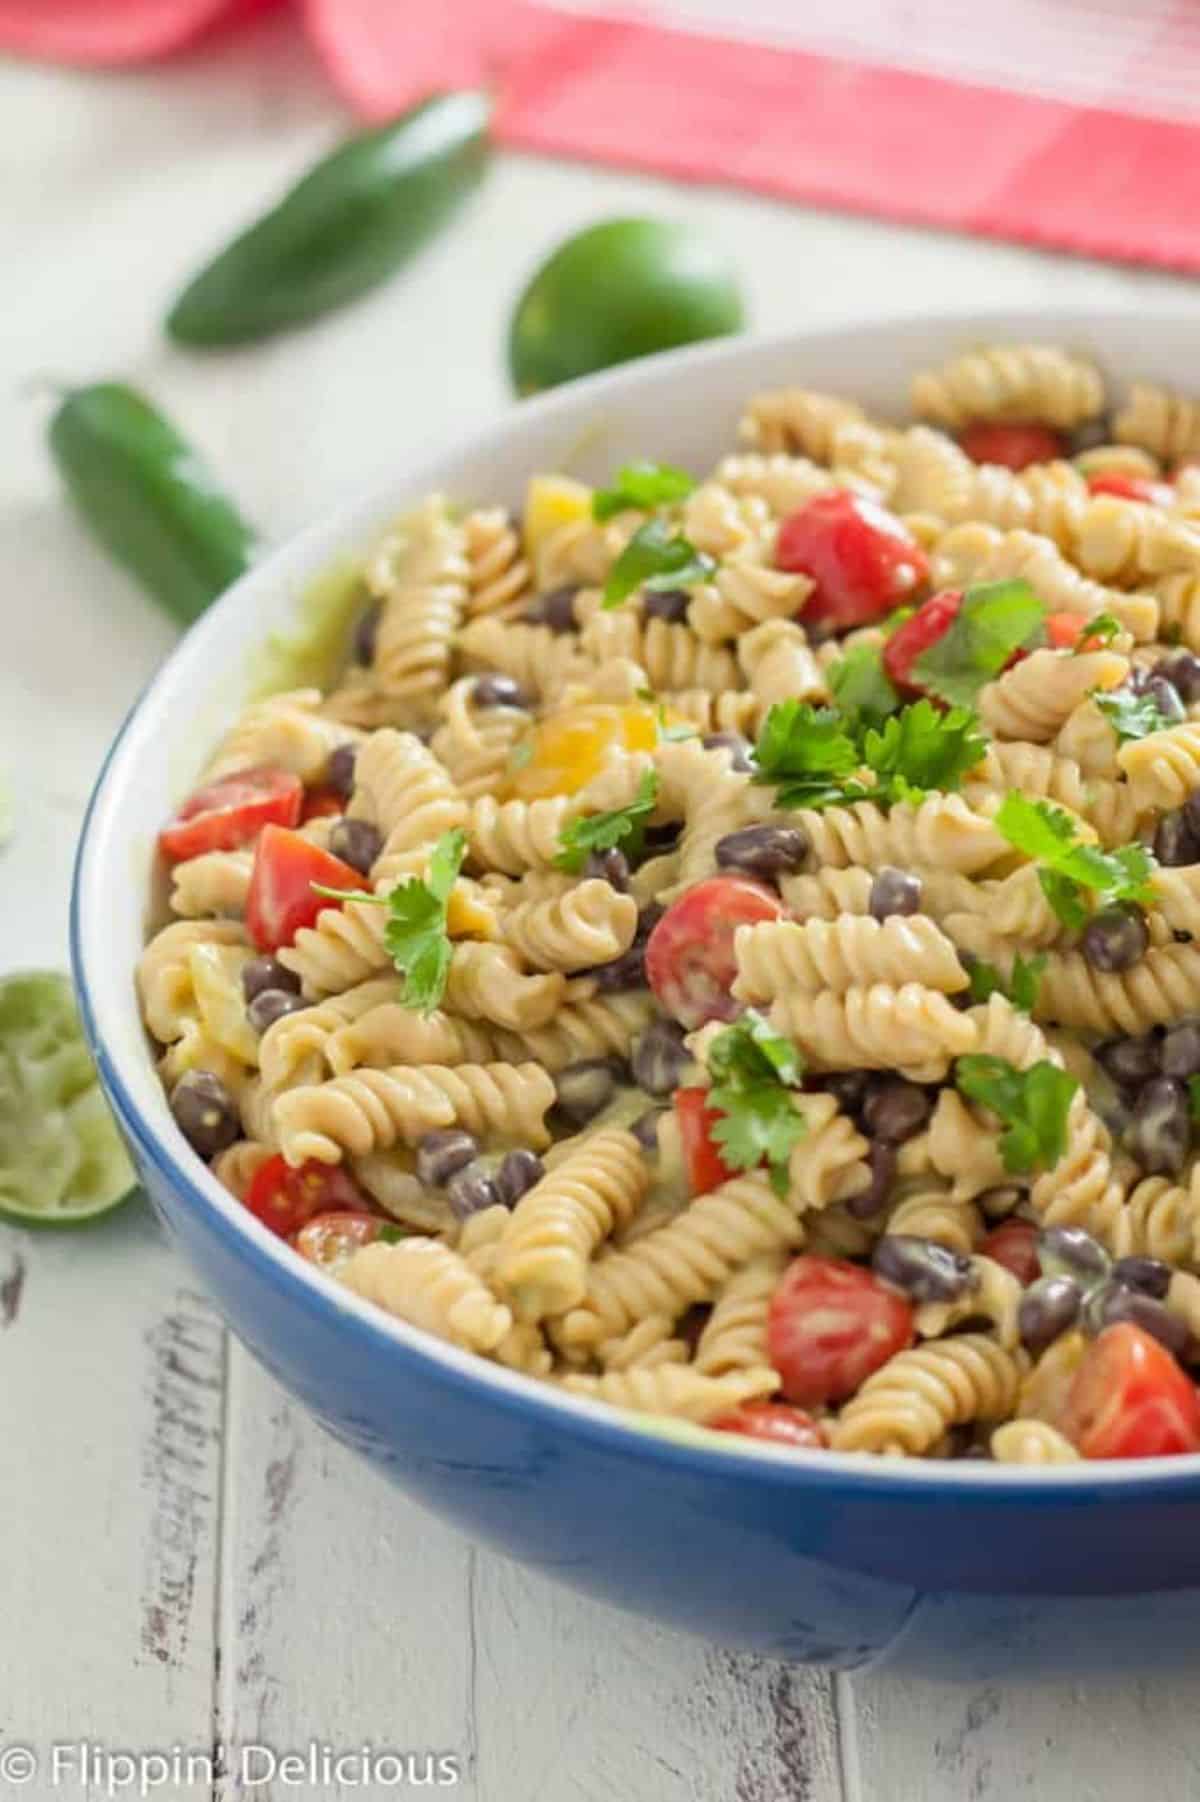 Delicious Gluten-Free Southwest Pasta Salad in a bowl.